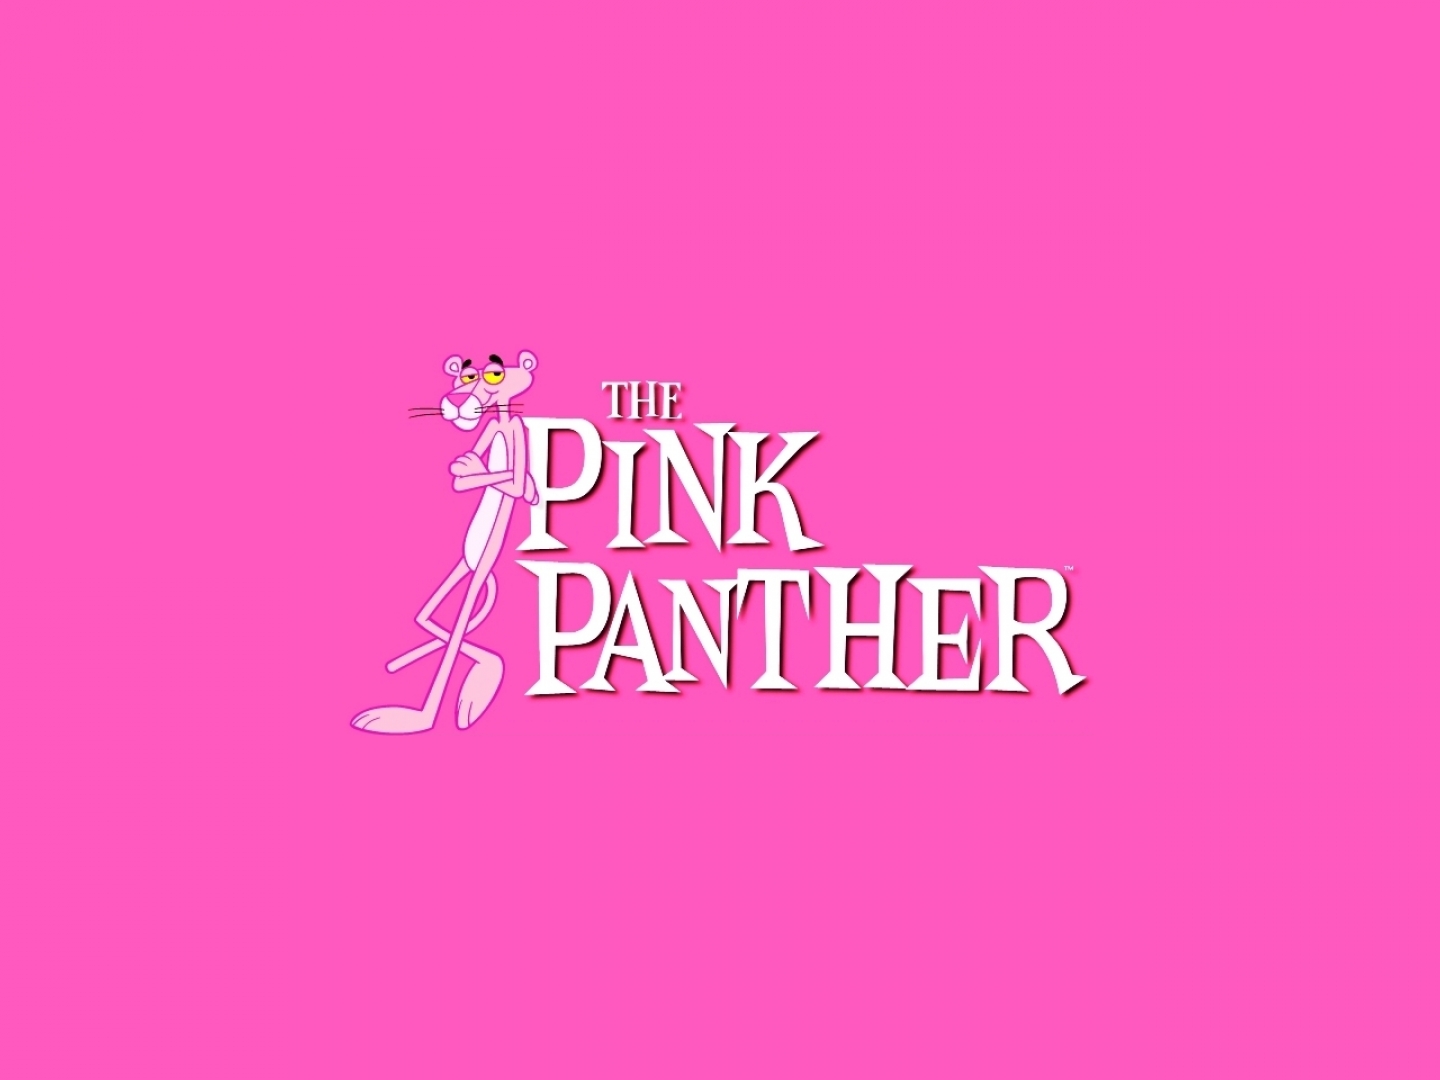 The Pink Panther Show Wallpaper and Background Image | 1440x1080 | ID ...